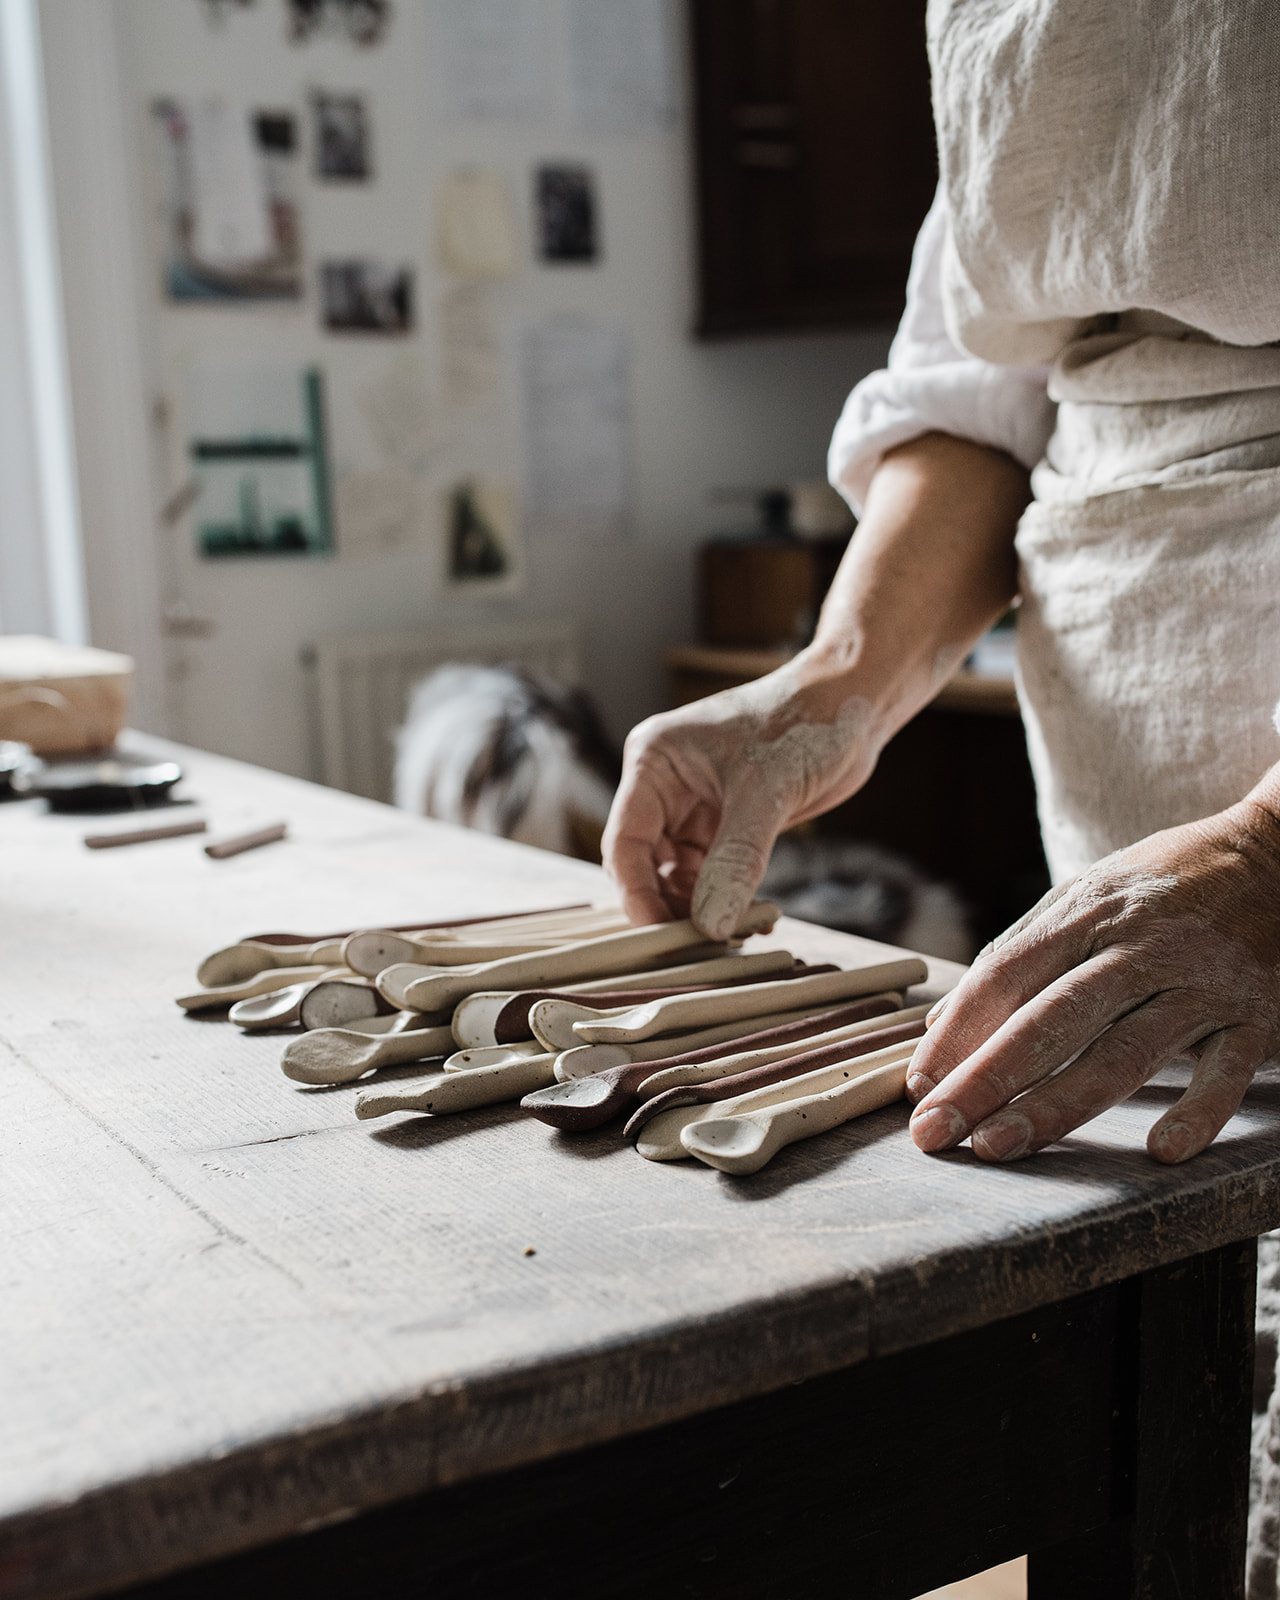 Handmade ceramic spoons on a wooden table.